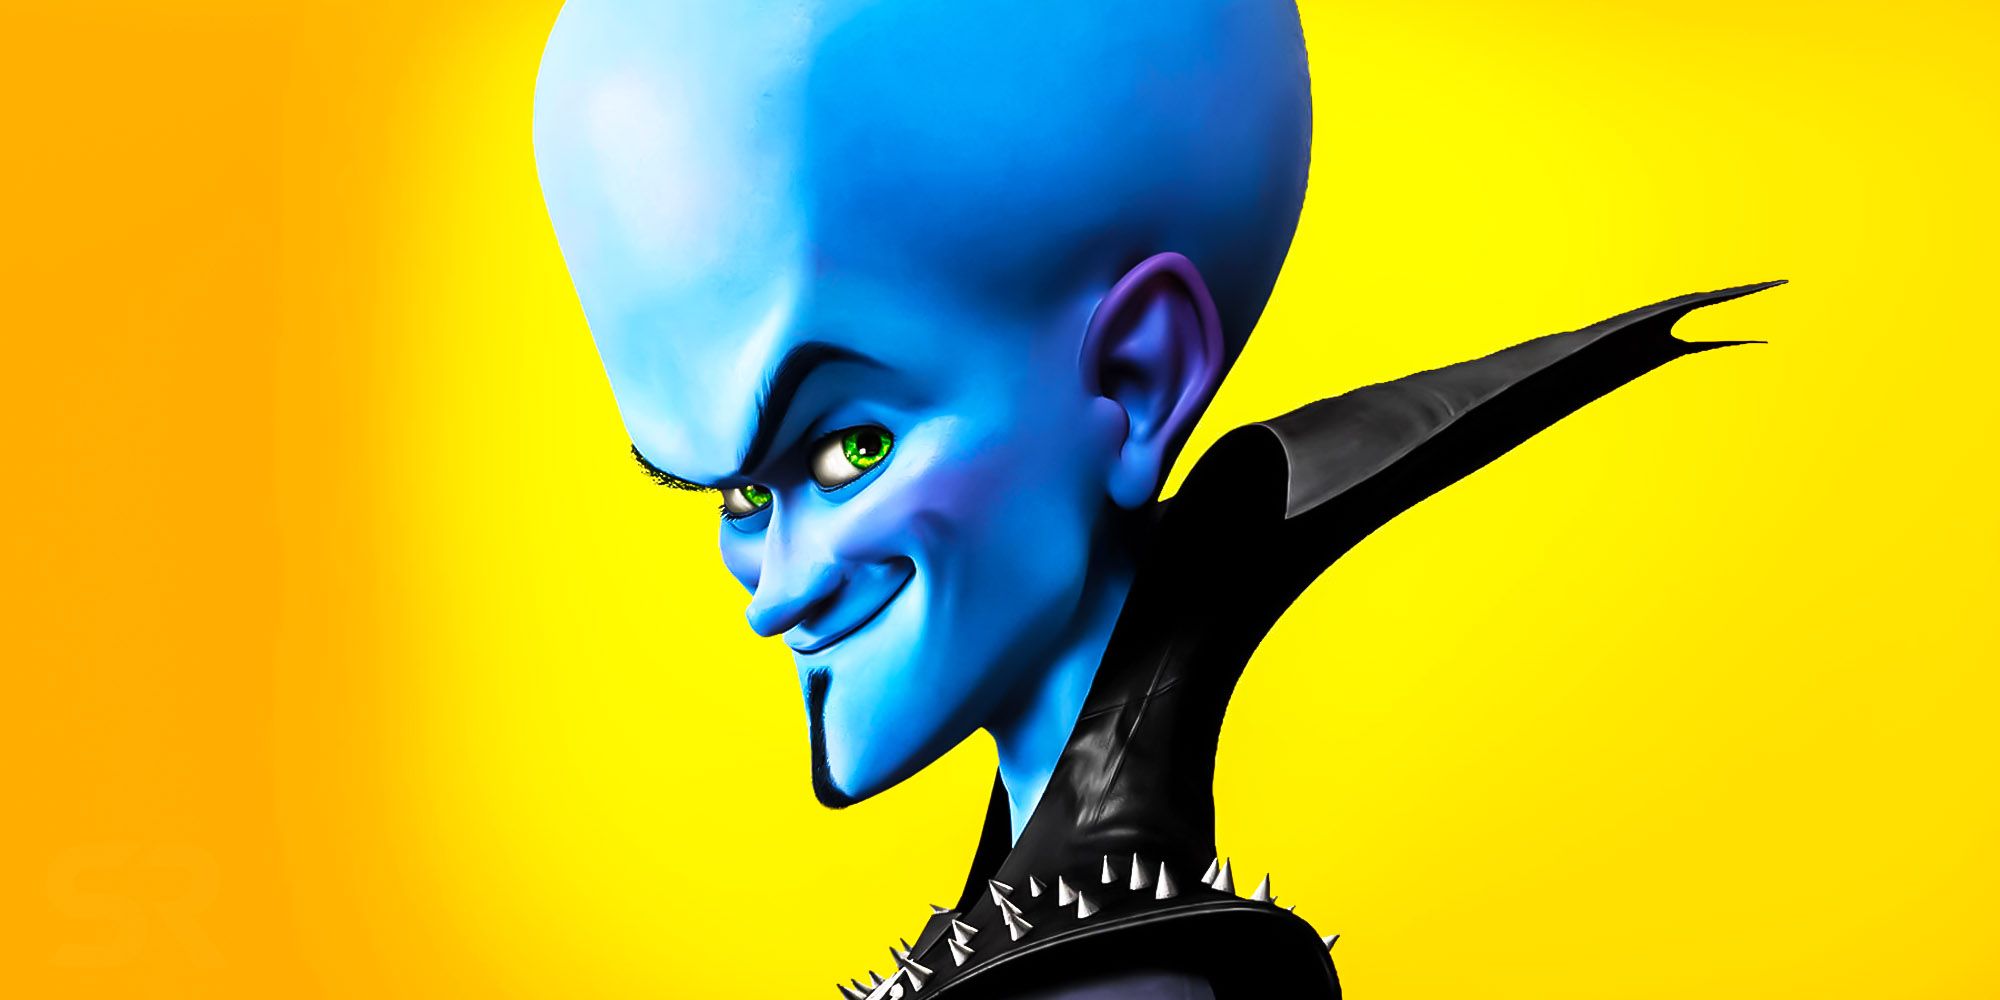 Megamind smiling at the camera with a yellow background